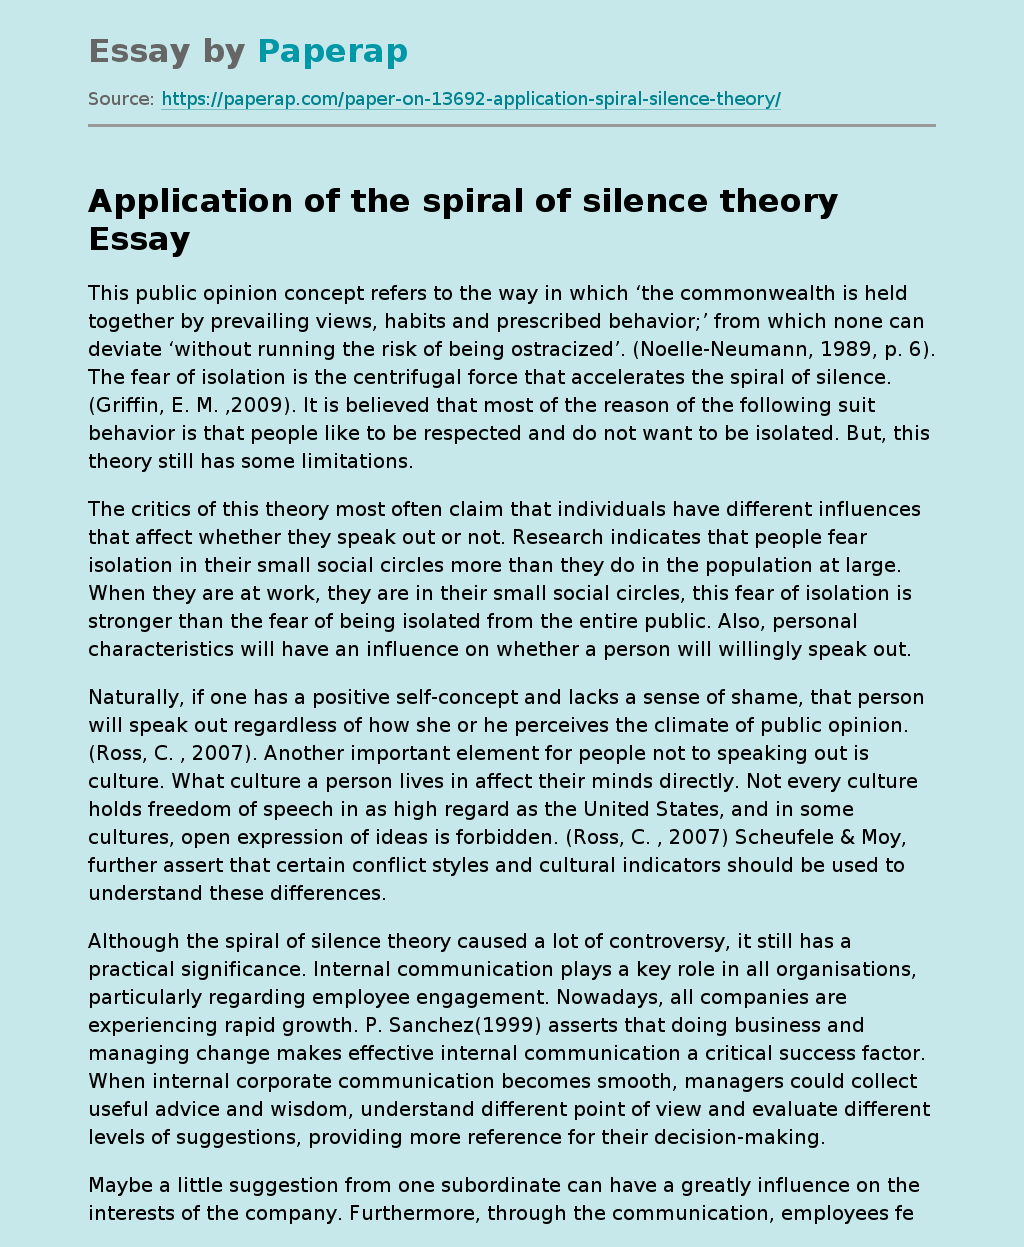 Application of the spiral of silence theory